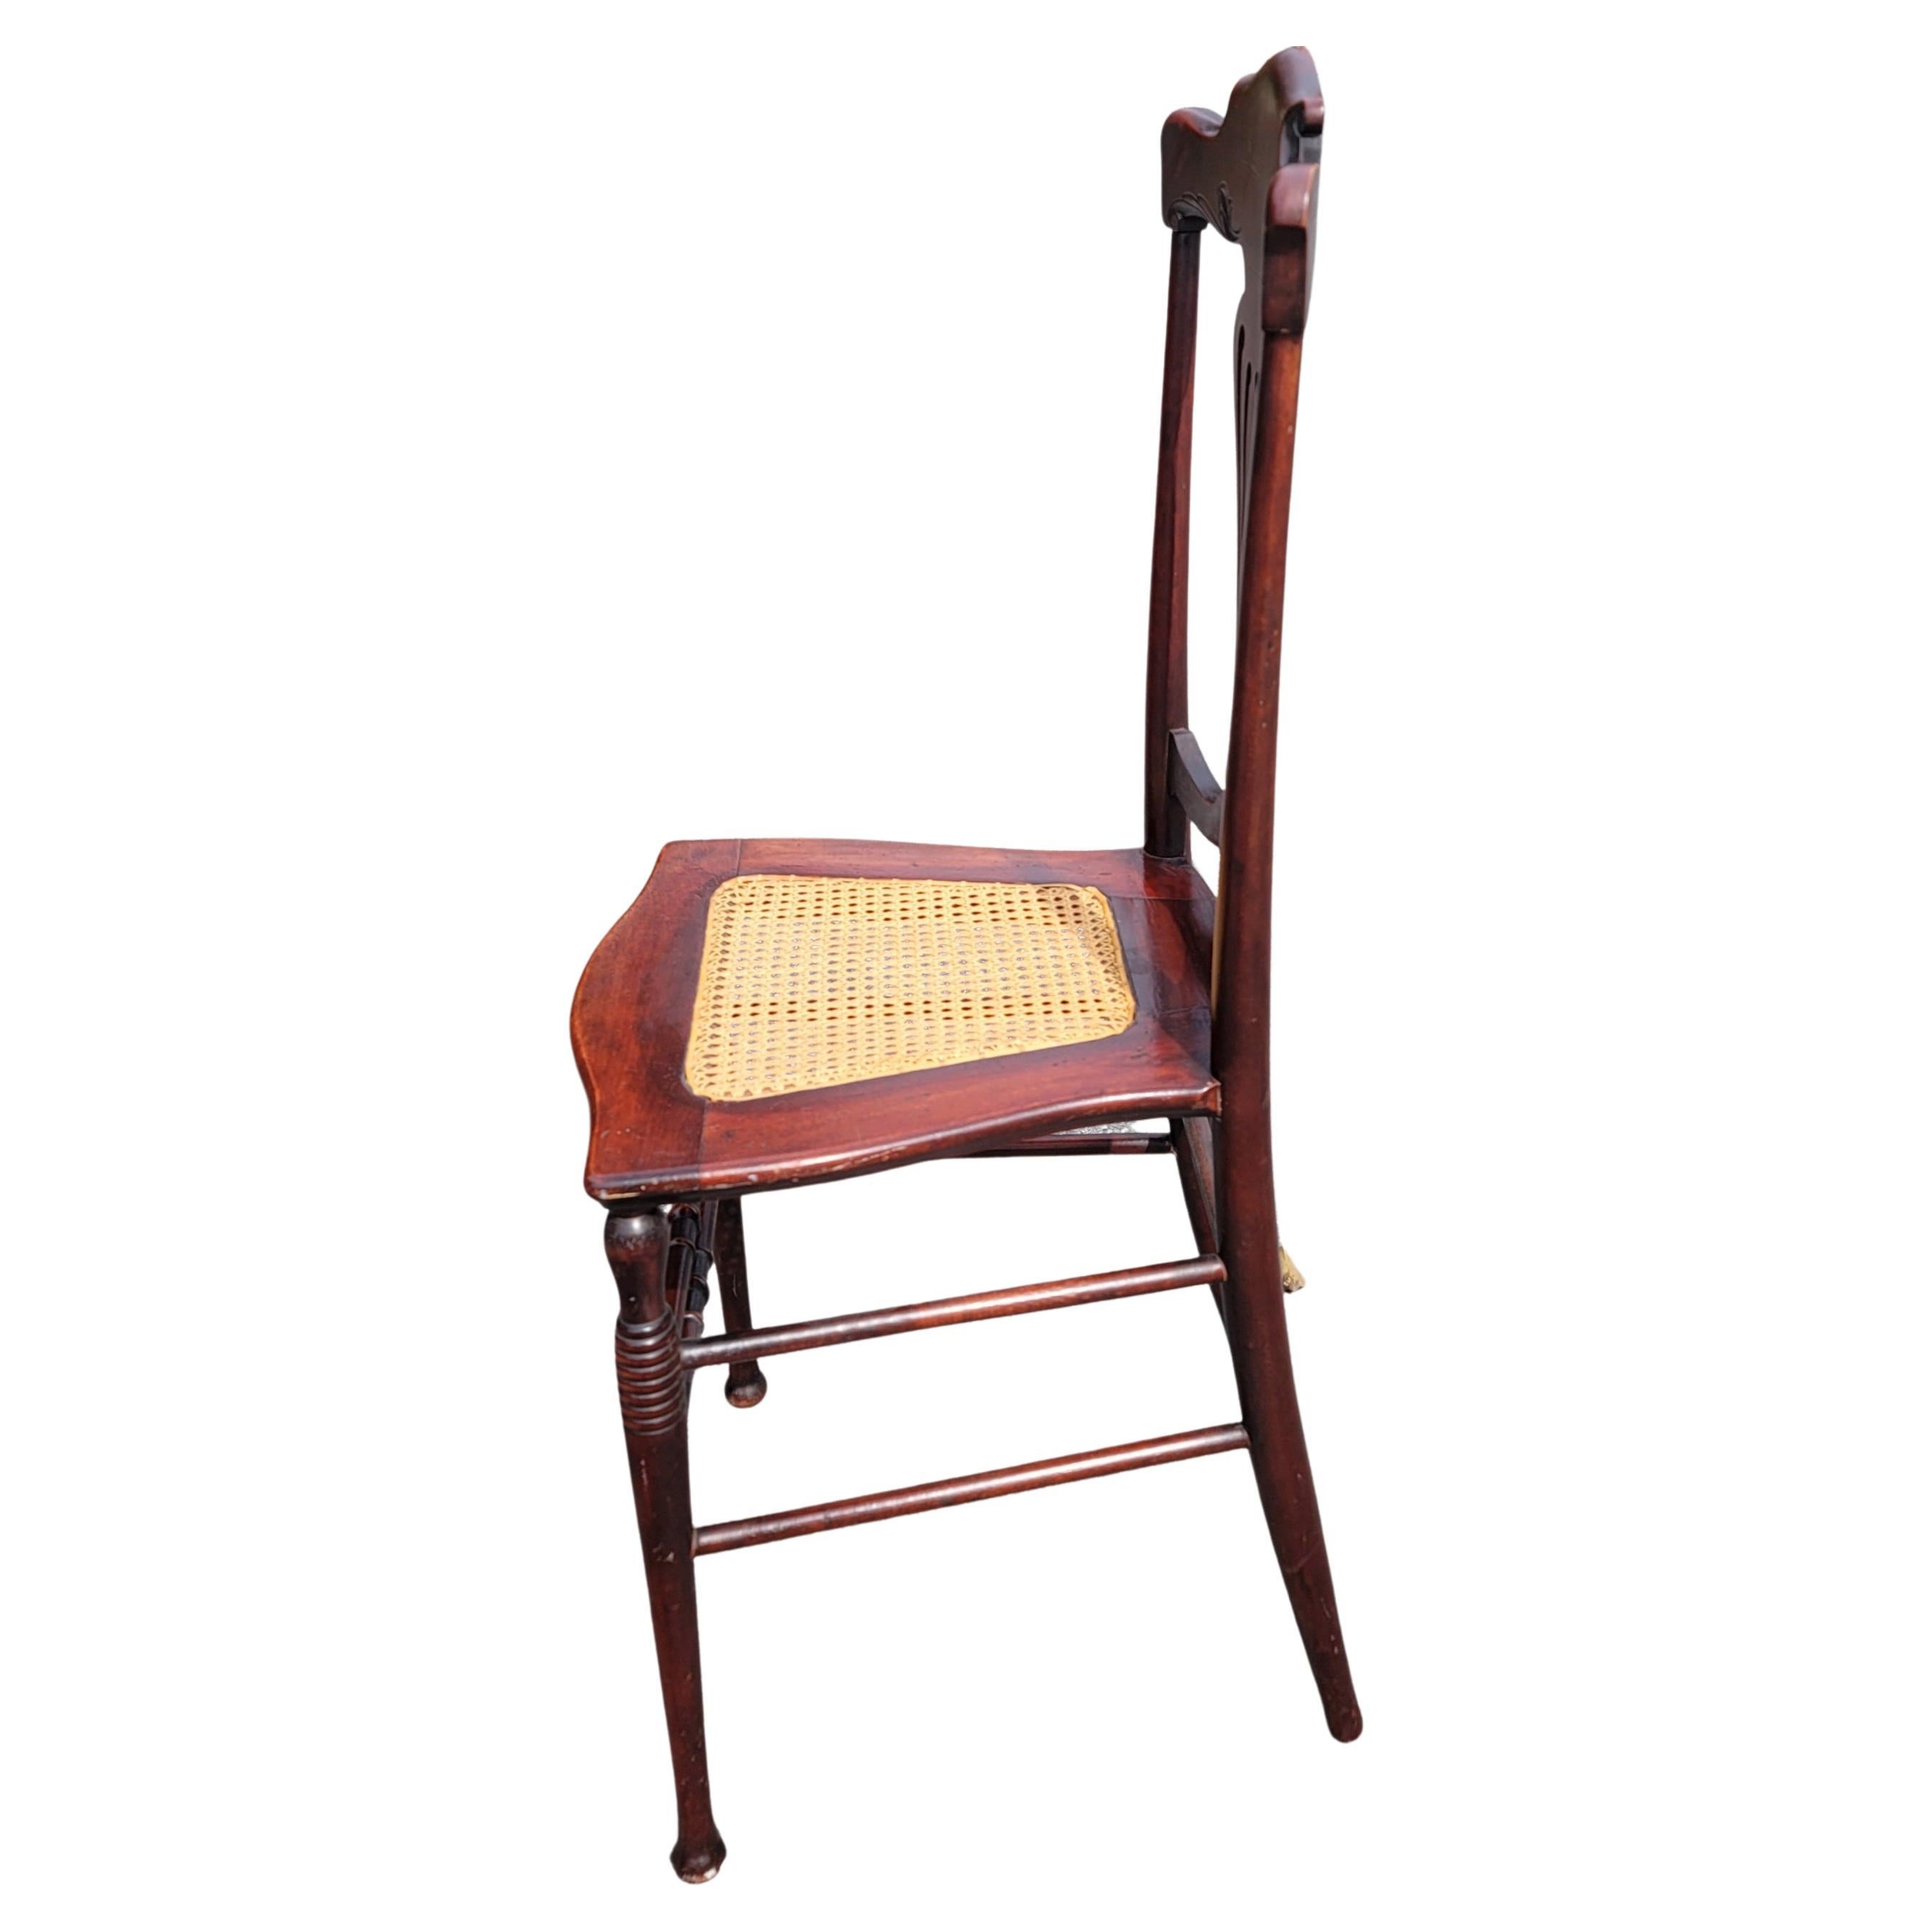 19th Century Refinished Early American Empire Mahogany and Cane Seat Chair For Sale